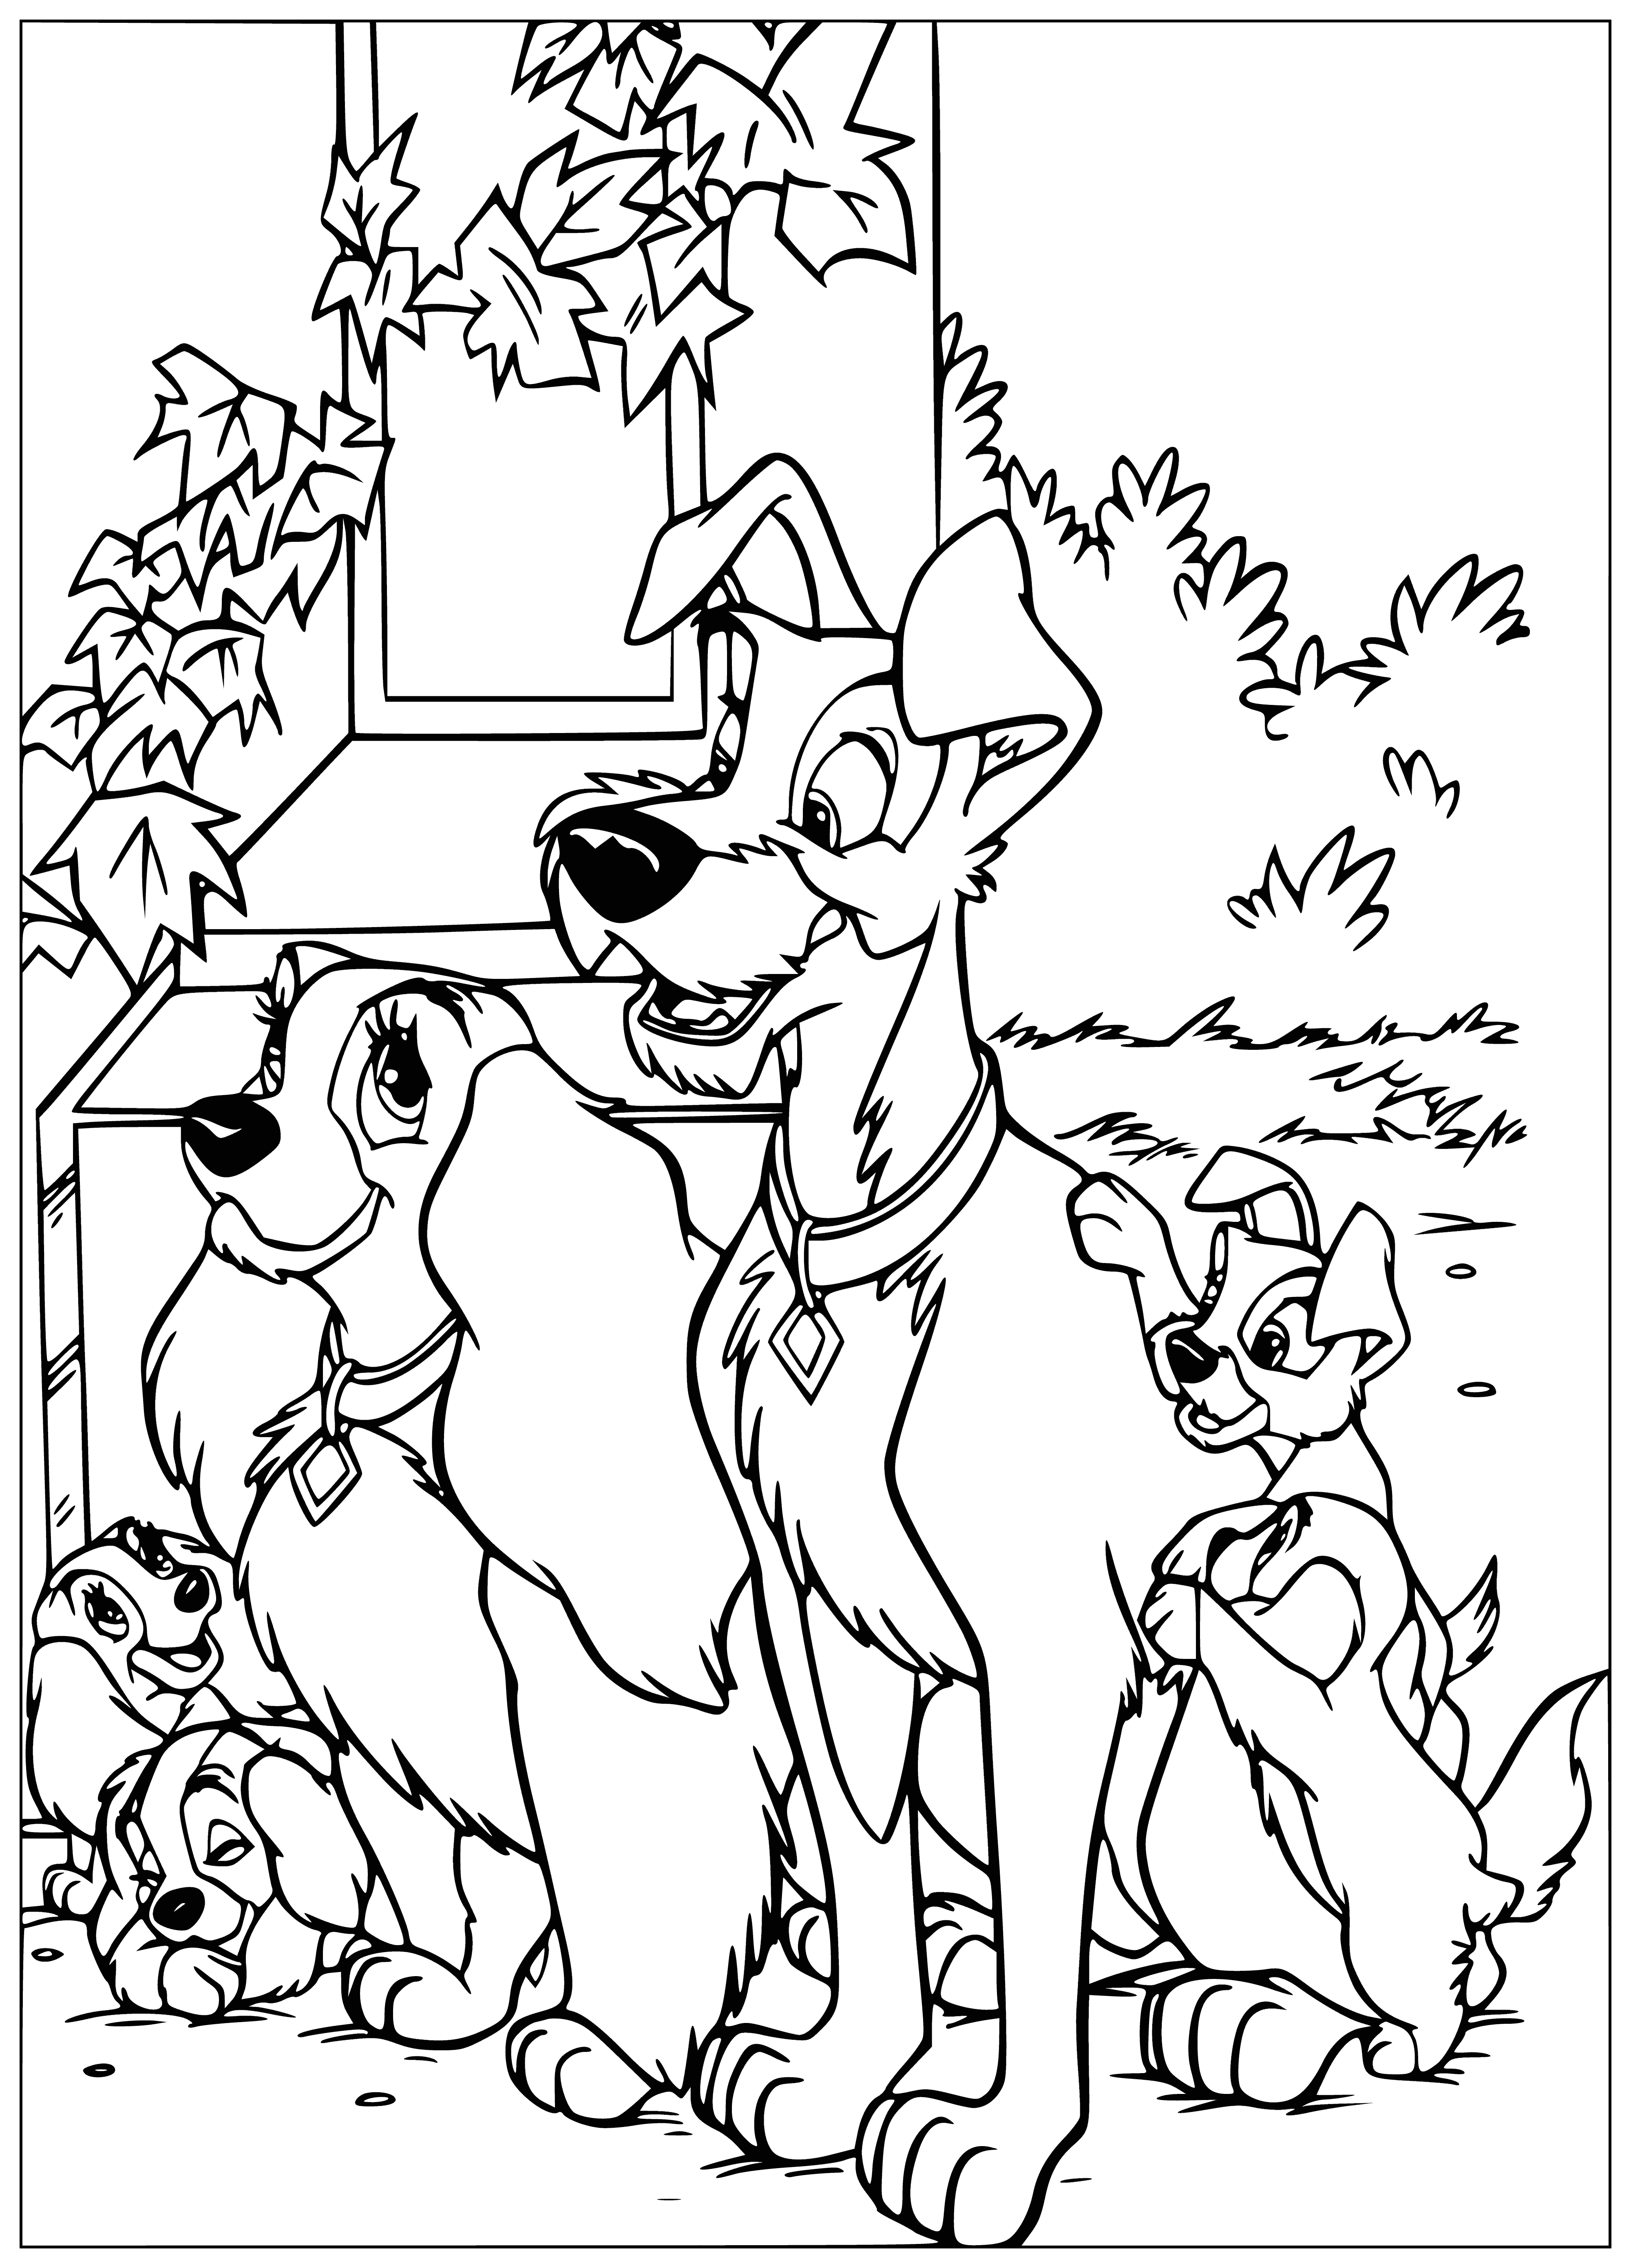 coloring page: Lady finds family and love, but Tramp can only sit and watch. He feels left out despite his own loving relationship. #LoveAndFamily